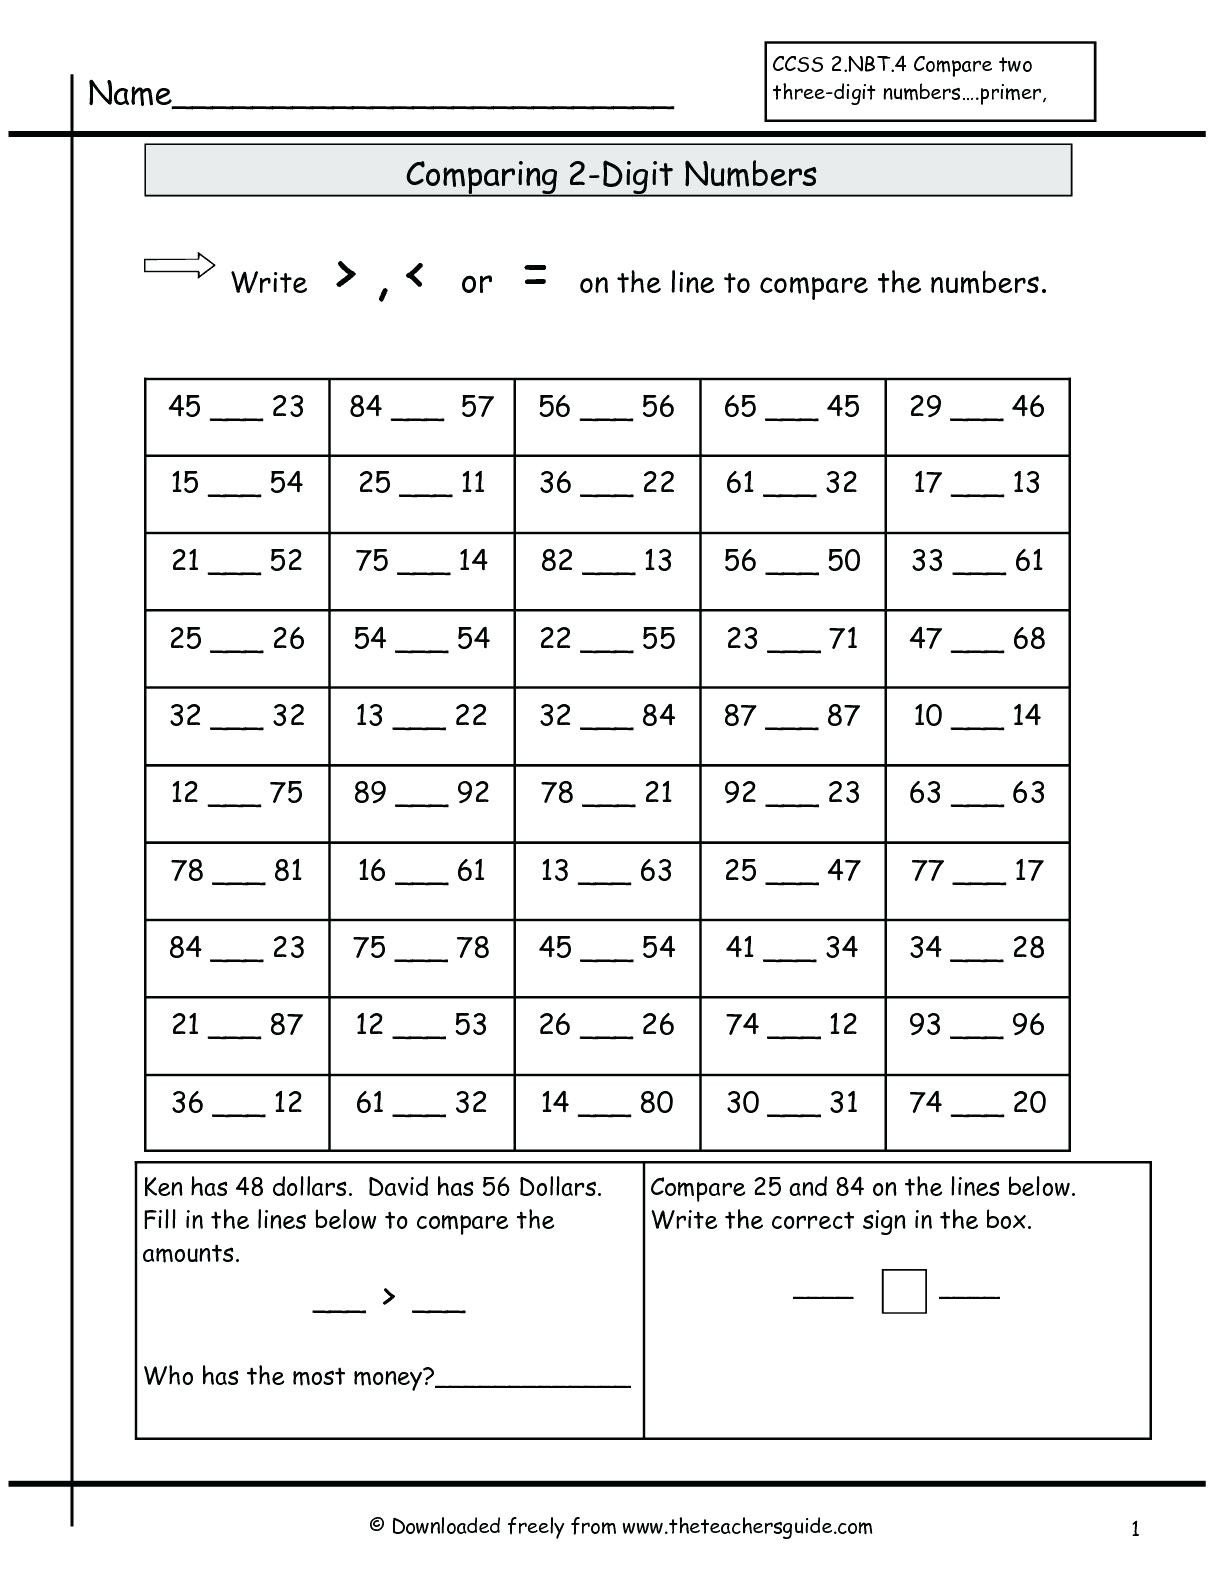 Free Math Worksheets First Grade 1 Counting Money Counting Money Pennies Nickels Dimes